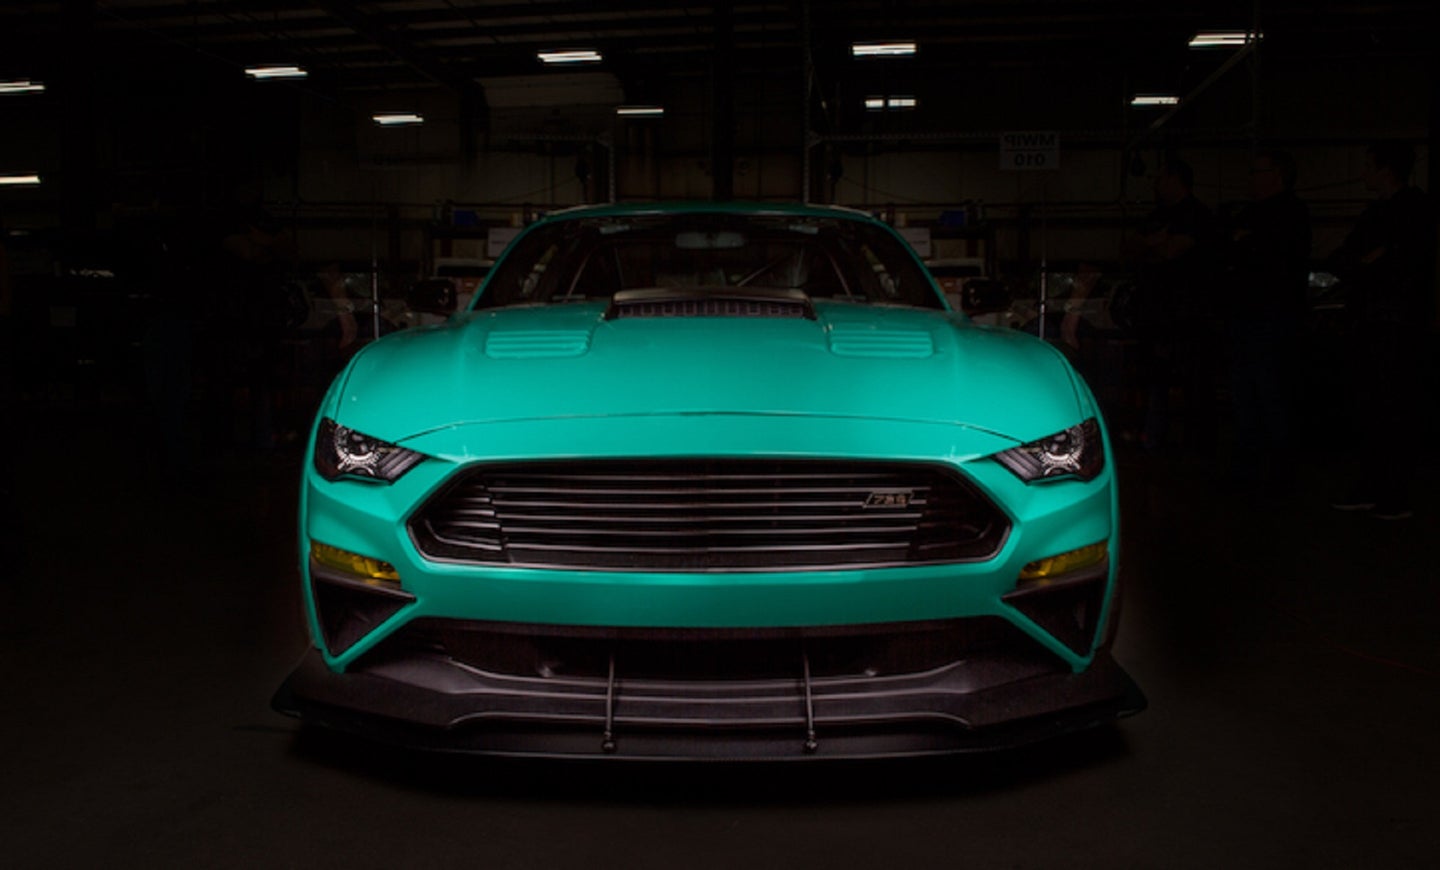 Mean, Green Roush 729 a Nod to the Boss 429